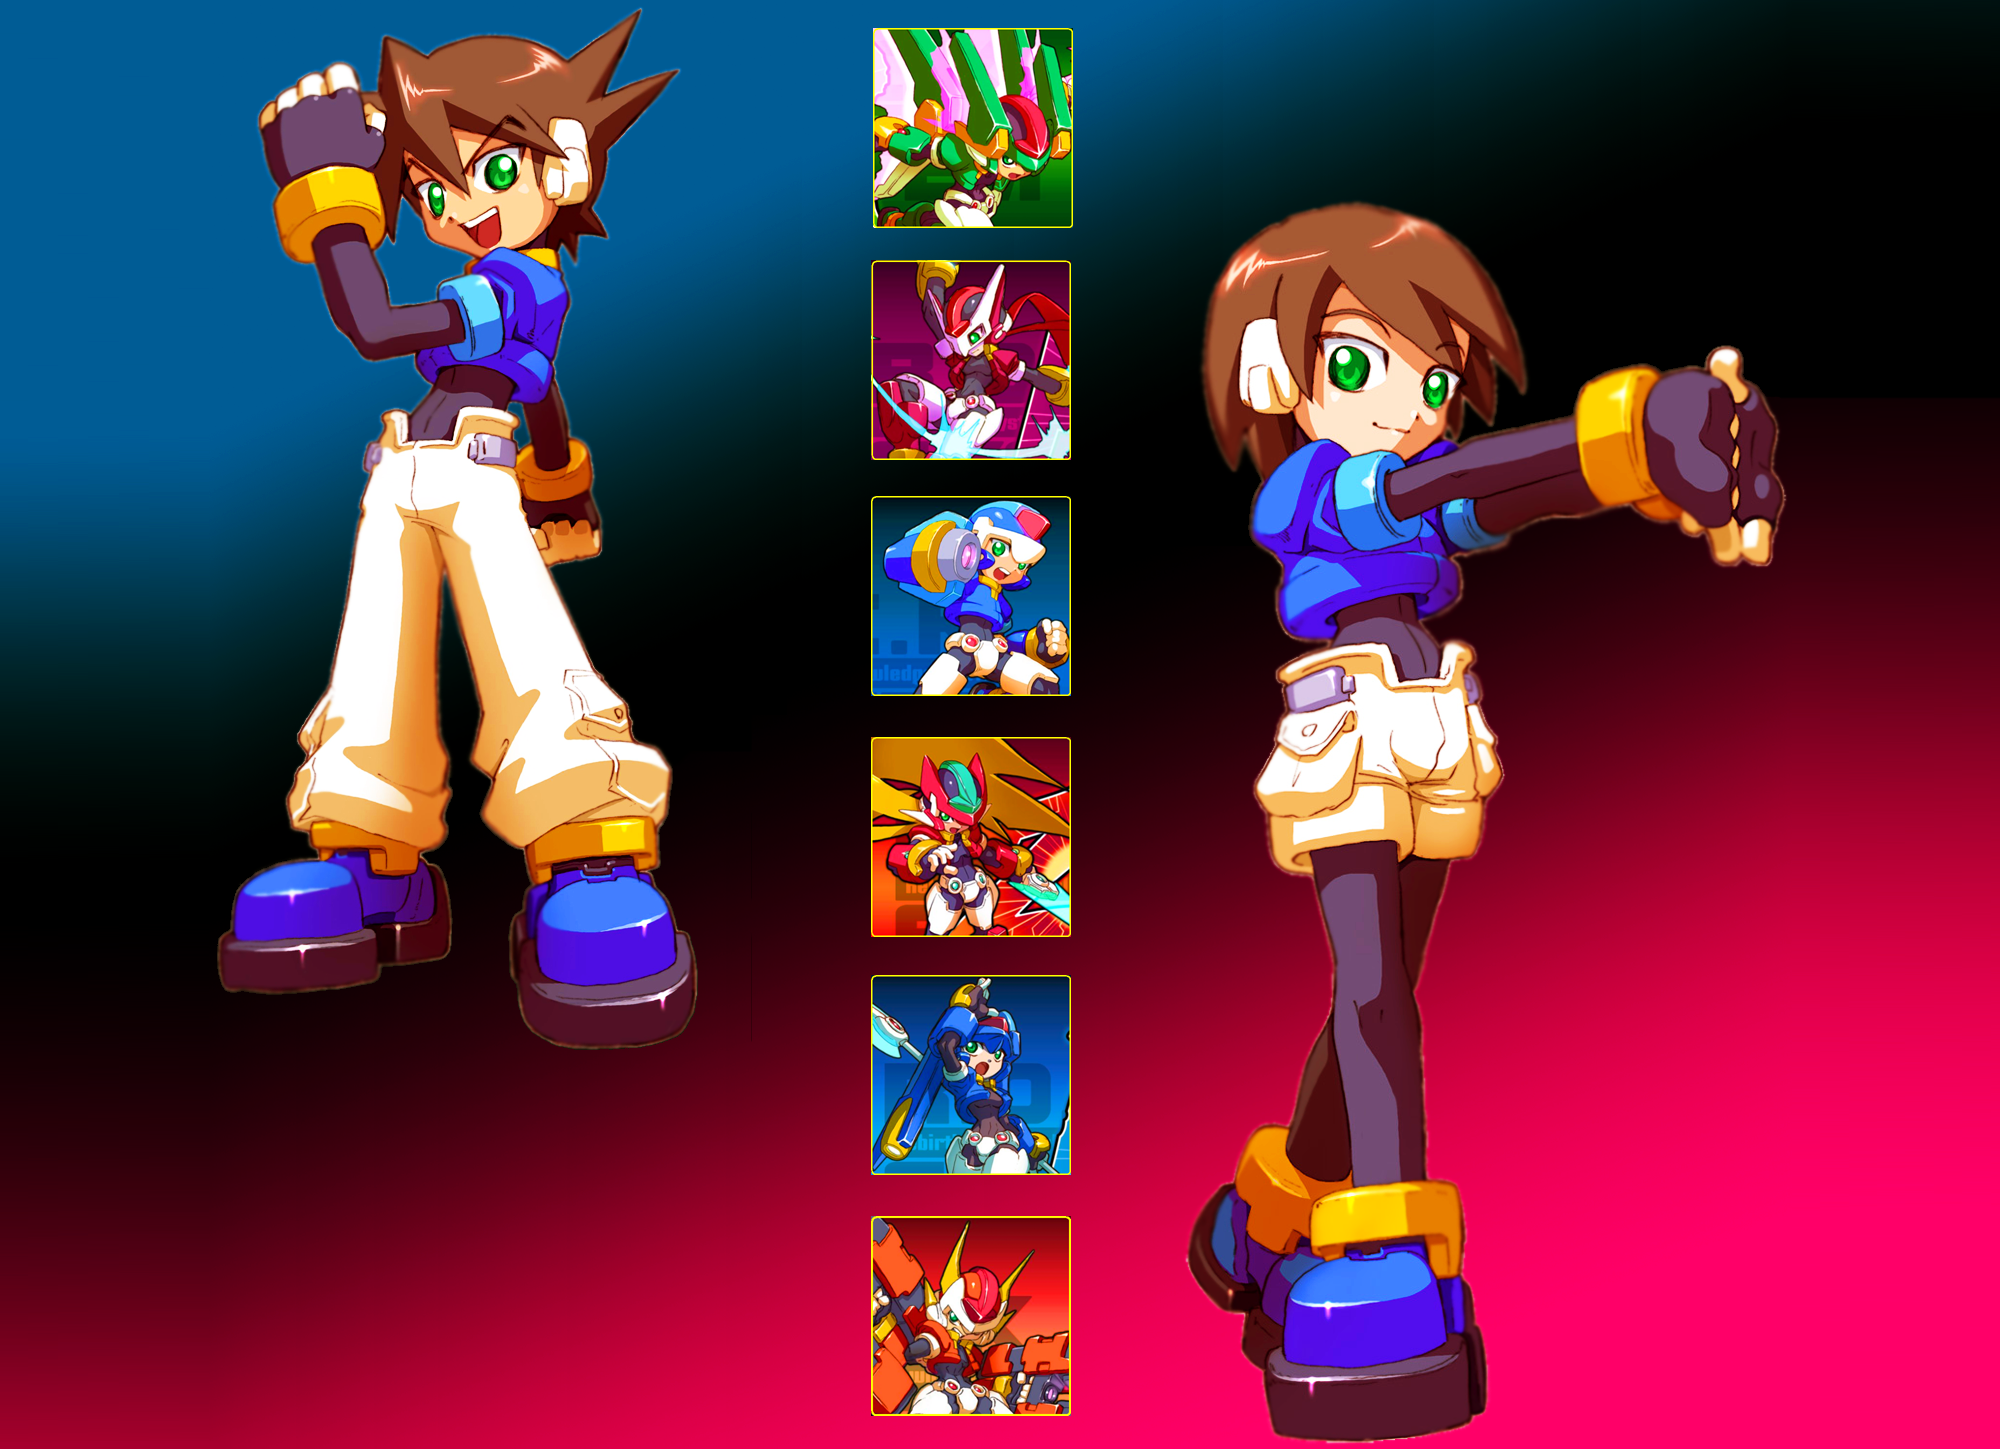 Megaman ZX Aile Y Vent Models By Gizzma On DeviantArt.